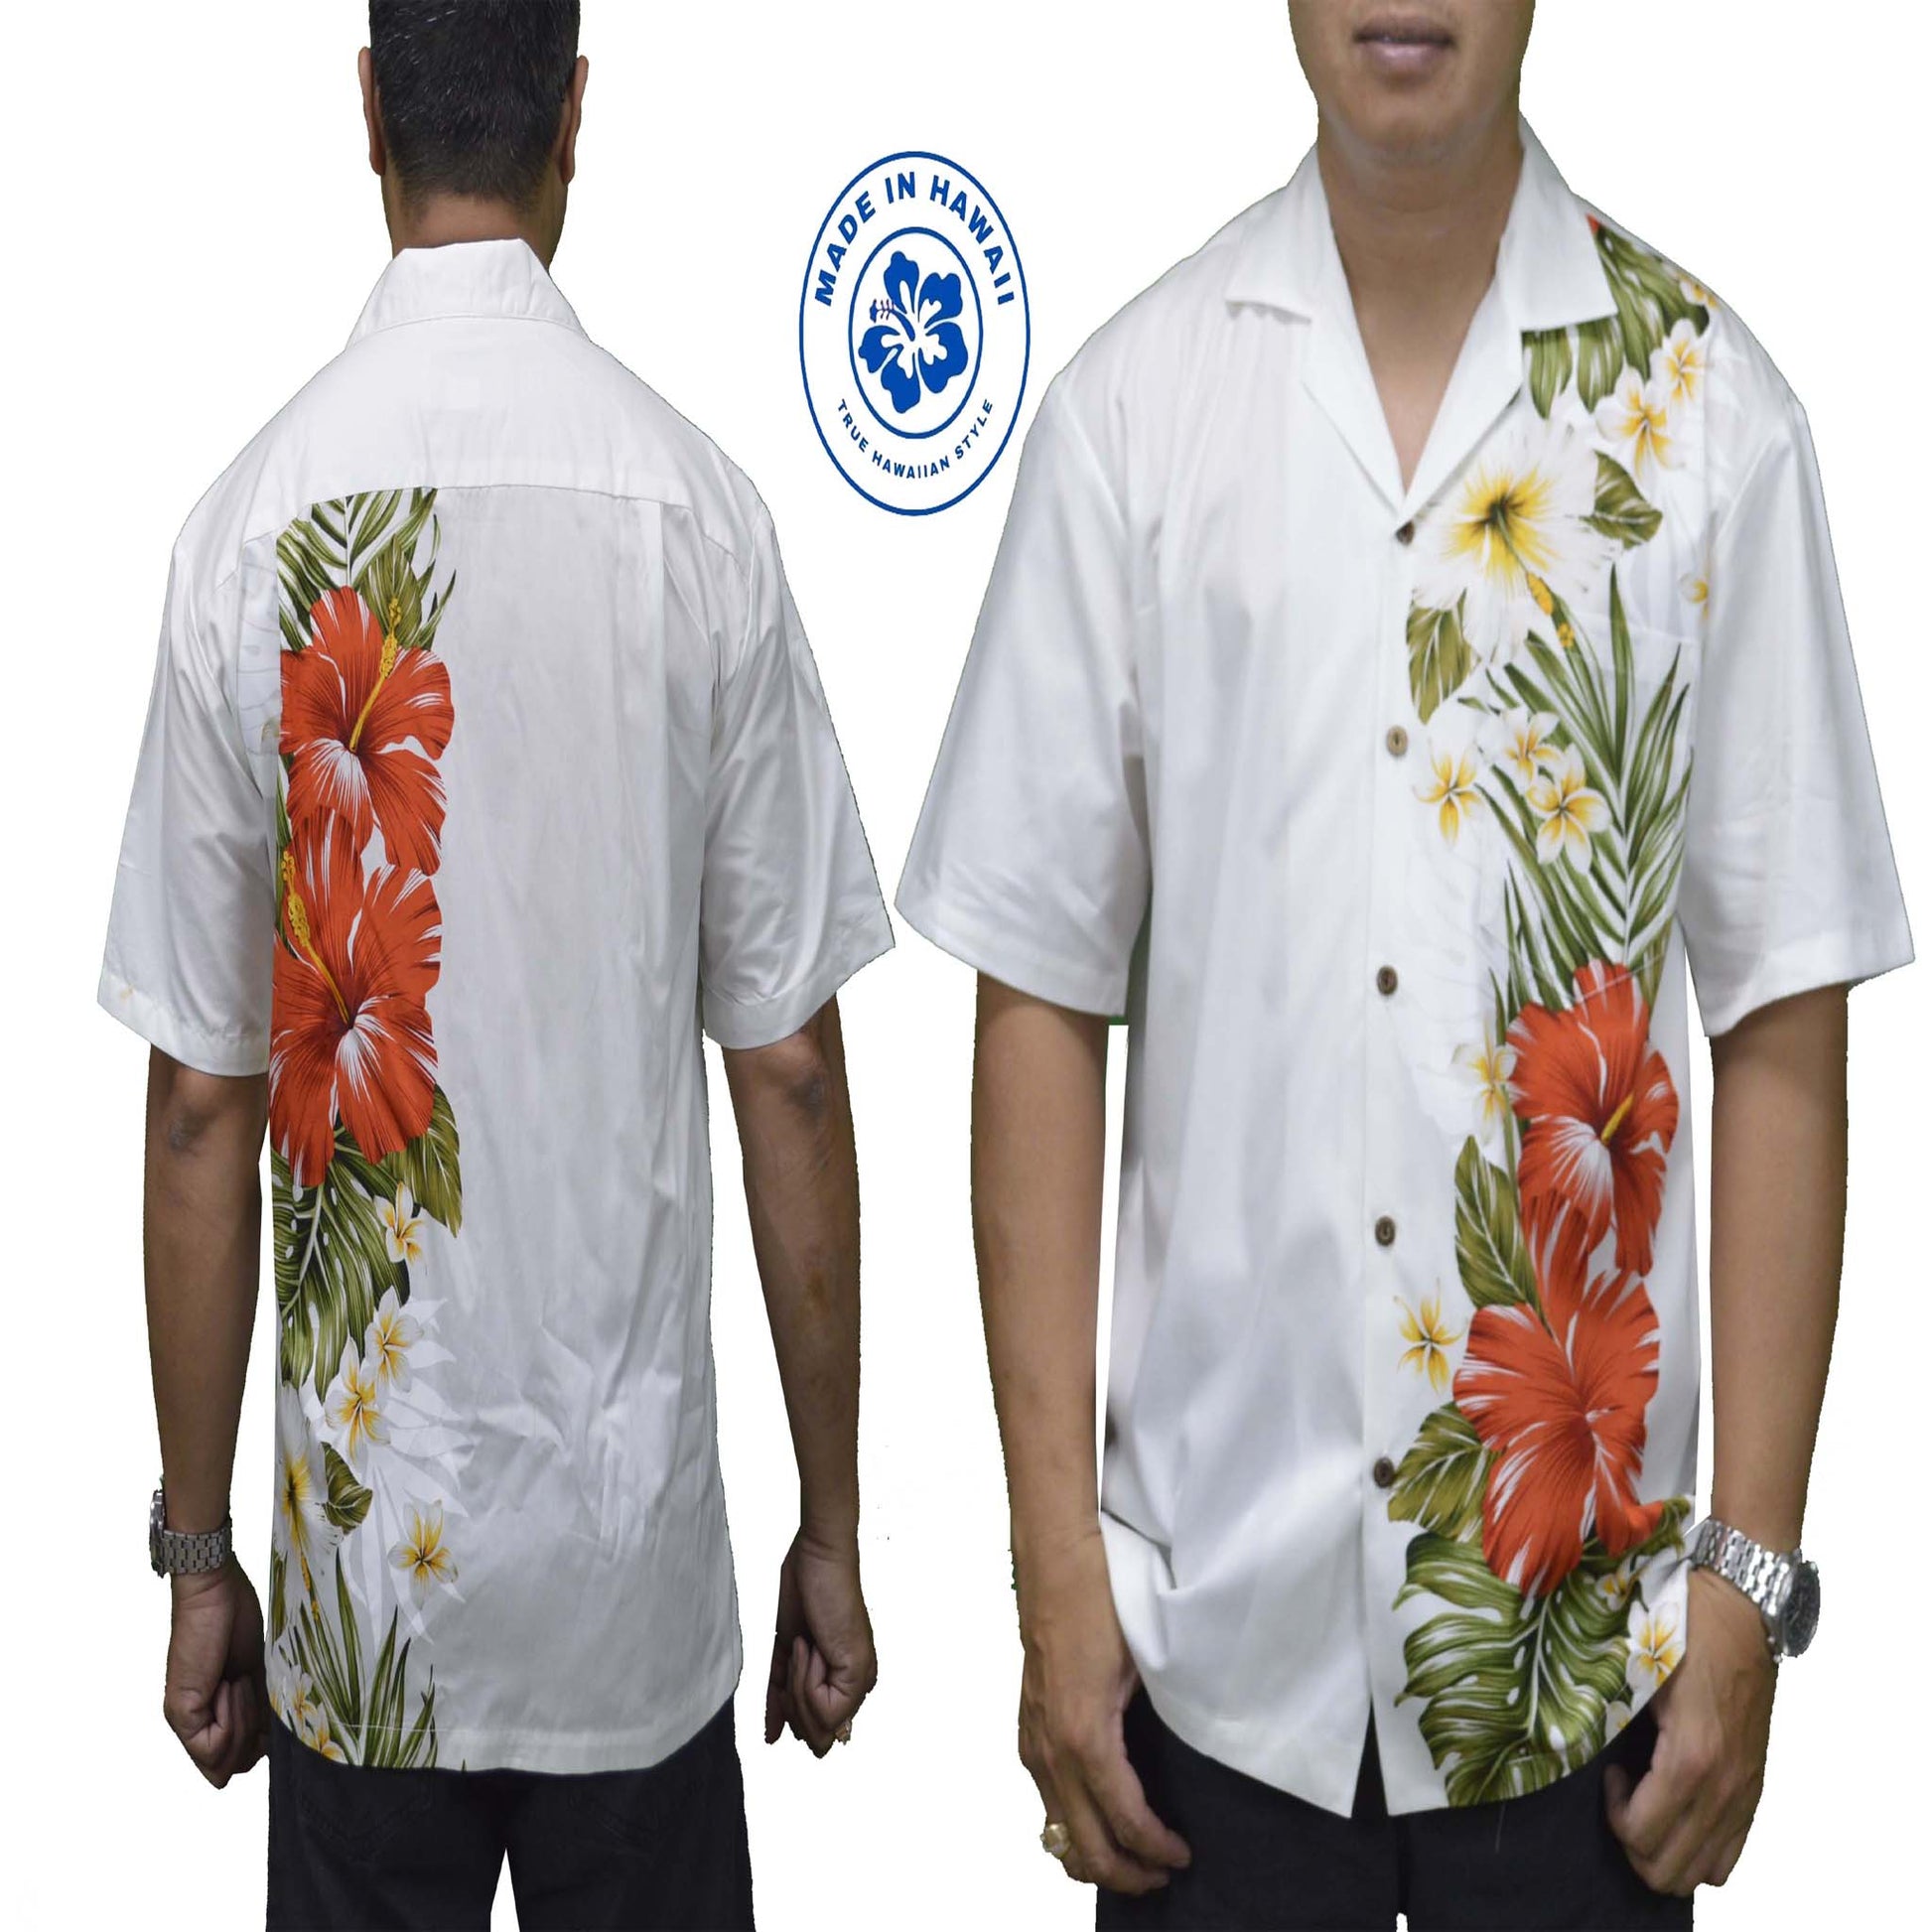 100% cotton Hawaiian shirt with red hibiscus side flower, white shirt is made locally Honolulu